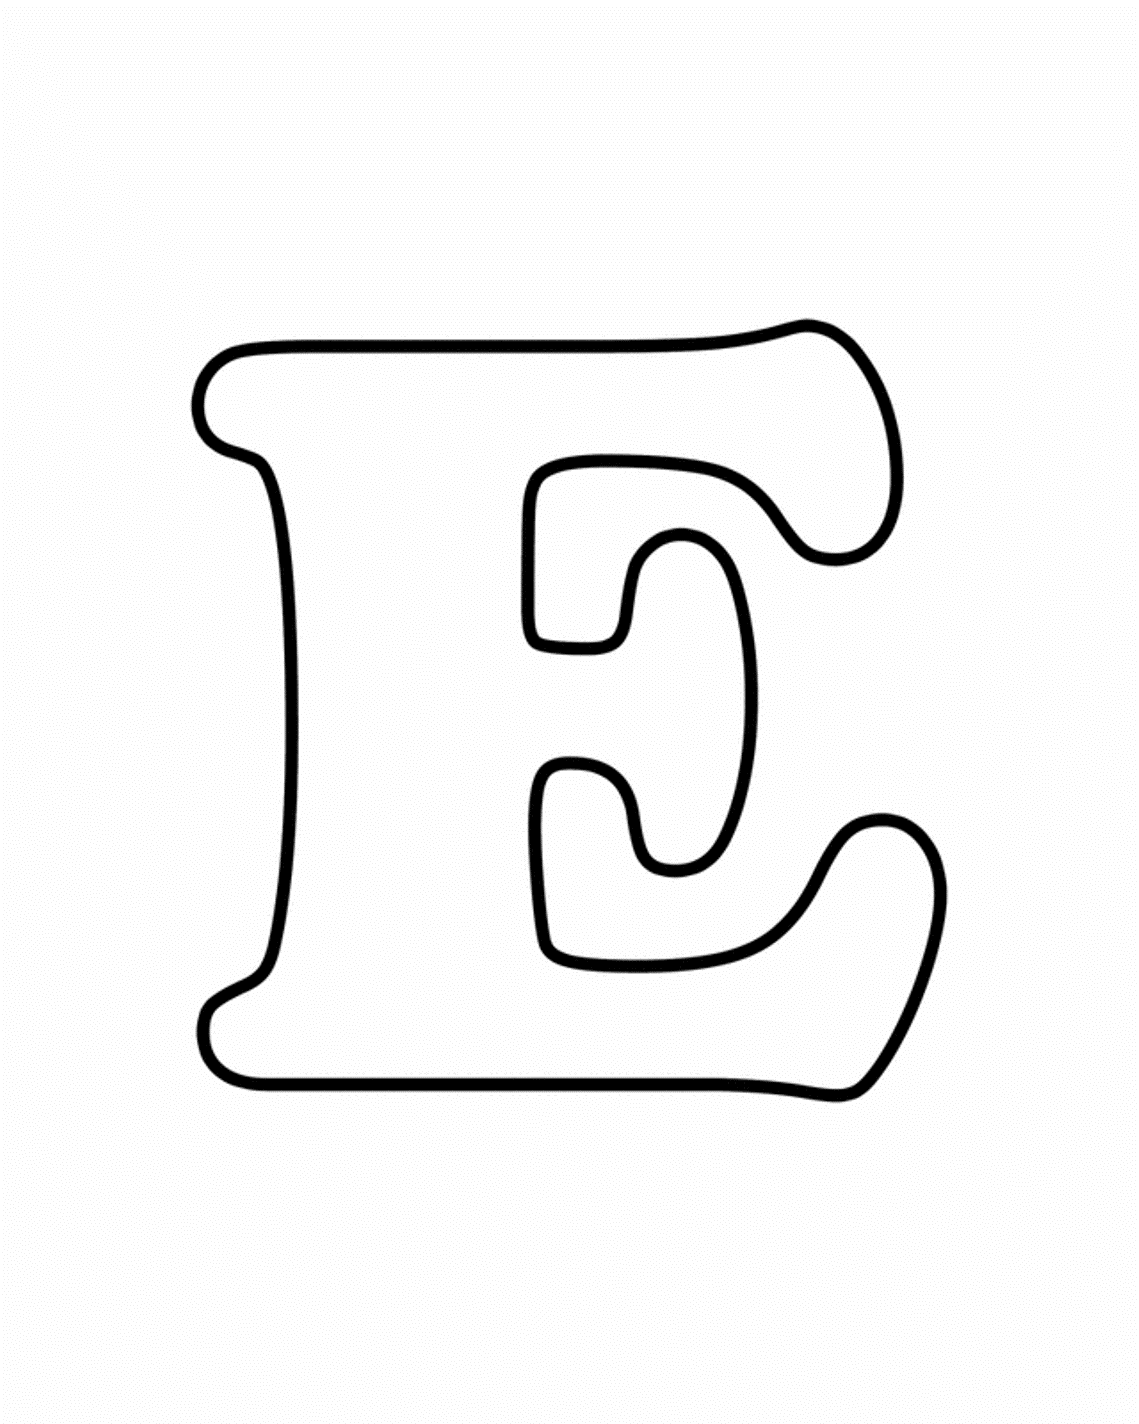 Coloring page: Alphabet (Educational) #125056 - Free Printable Coloring Pages